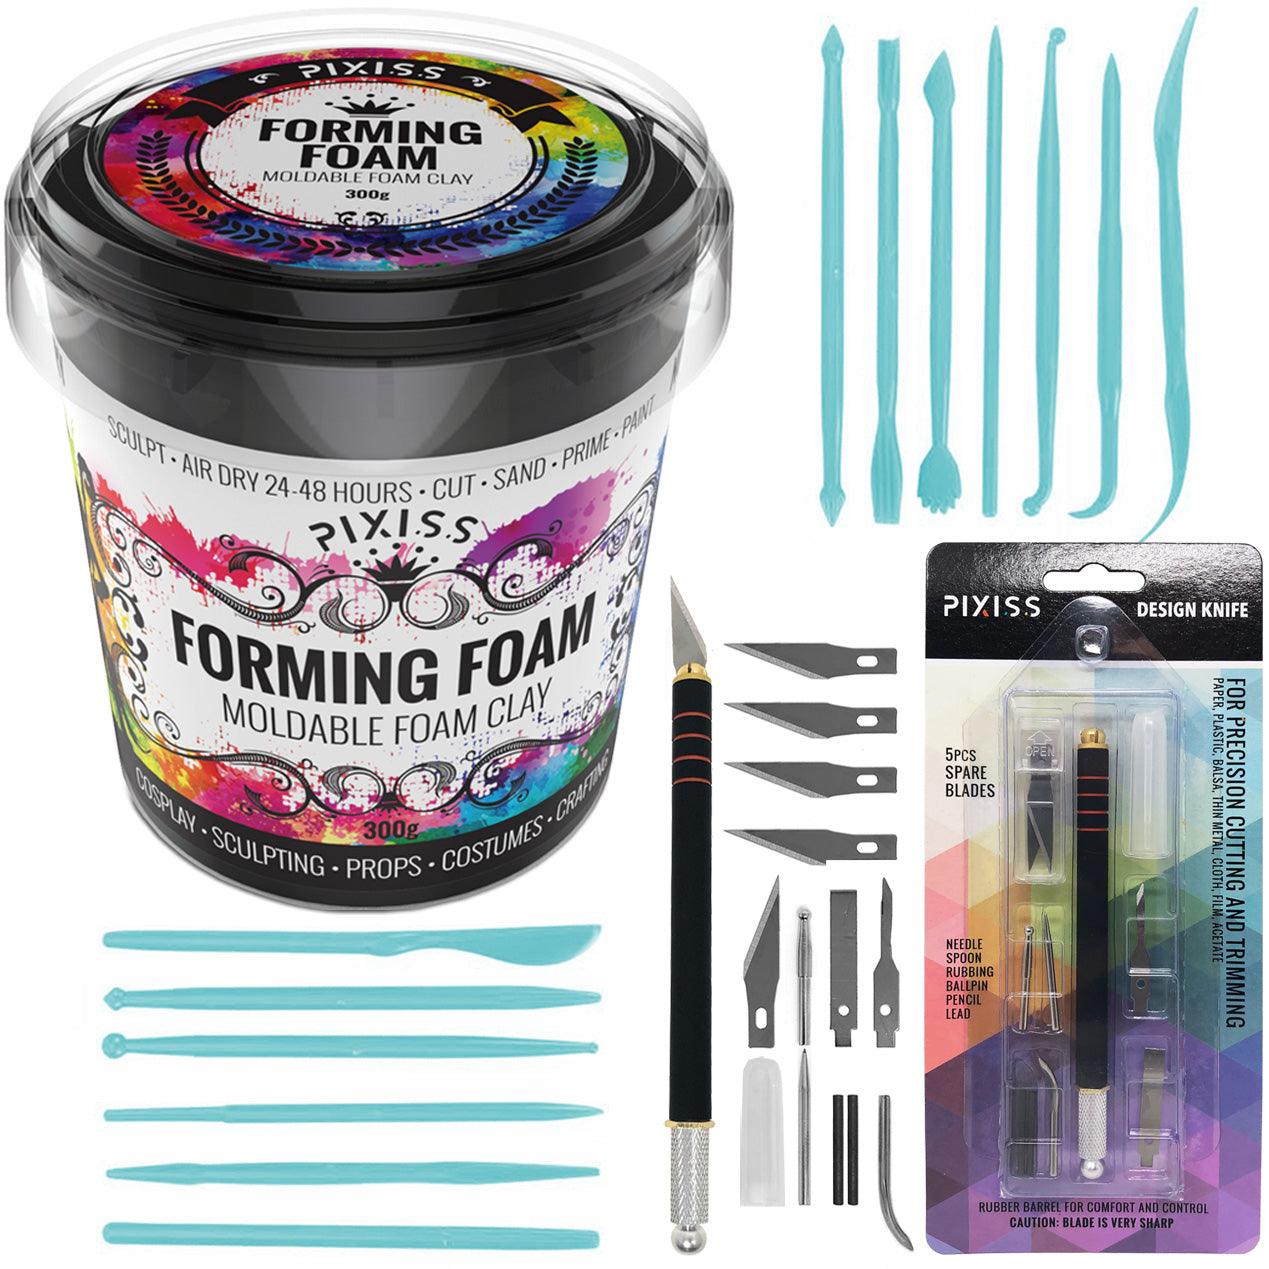 PIXISS Black Forming Foam Crafting Kit with Accessories by Pixiss - Vysn